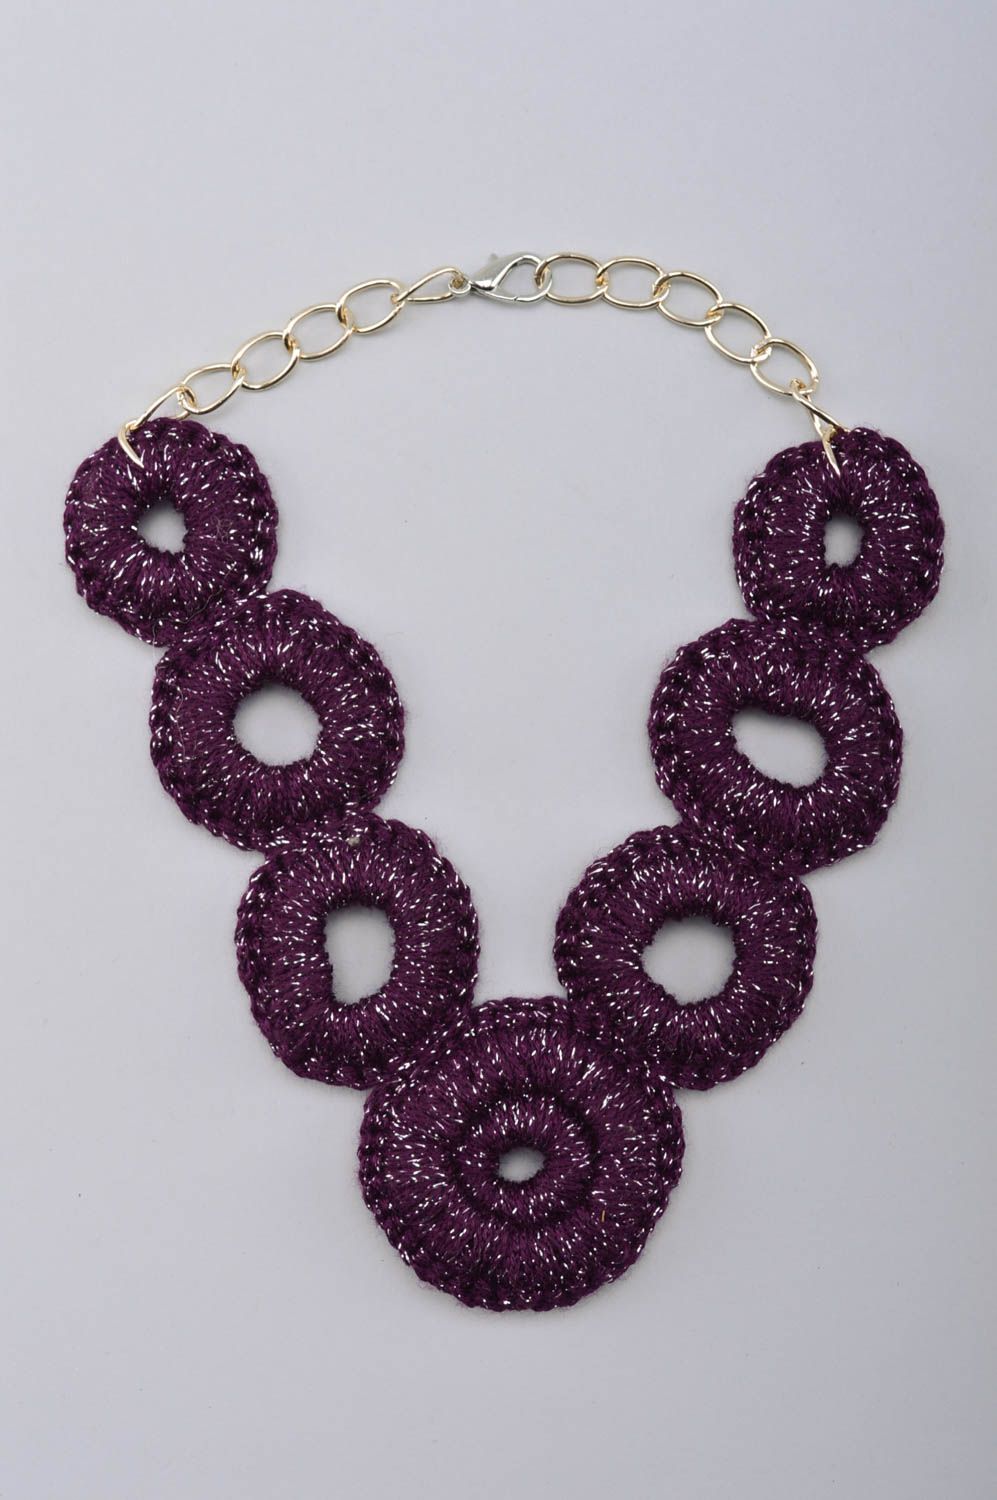 Handmade textile necklace beautiful violet necklace stunning jewelry gift photo 5